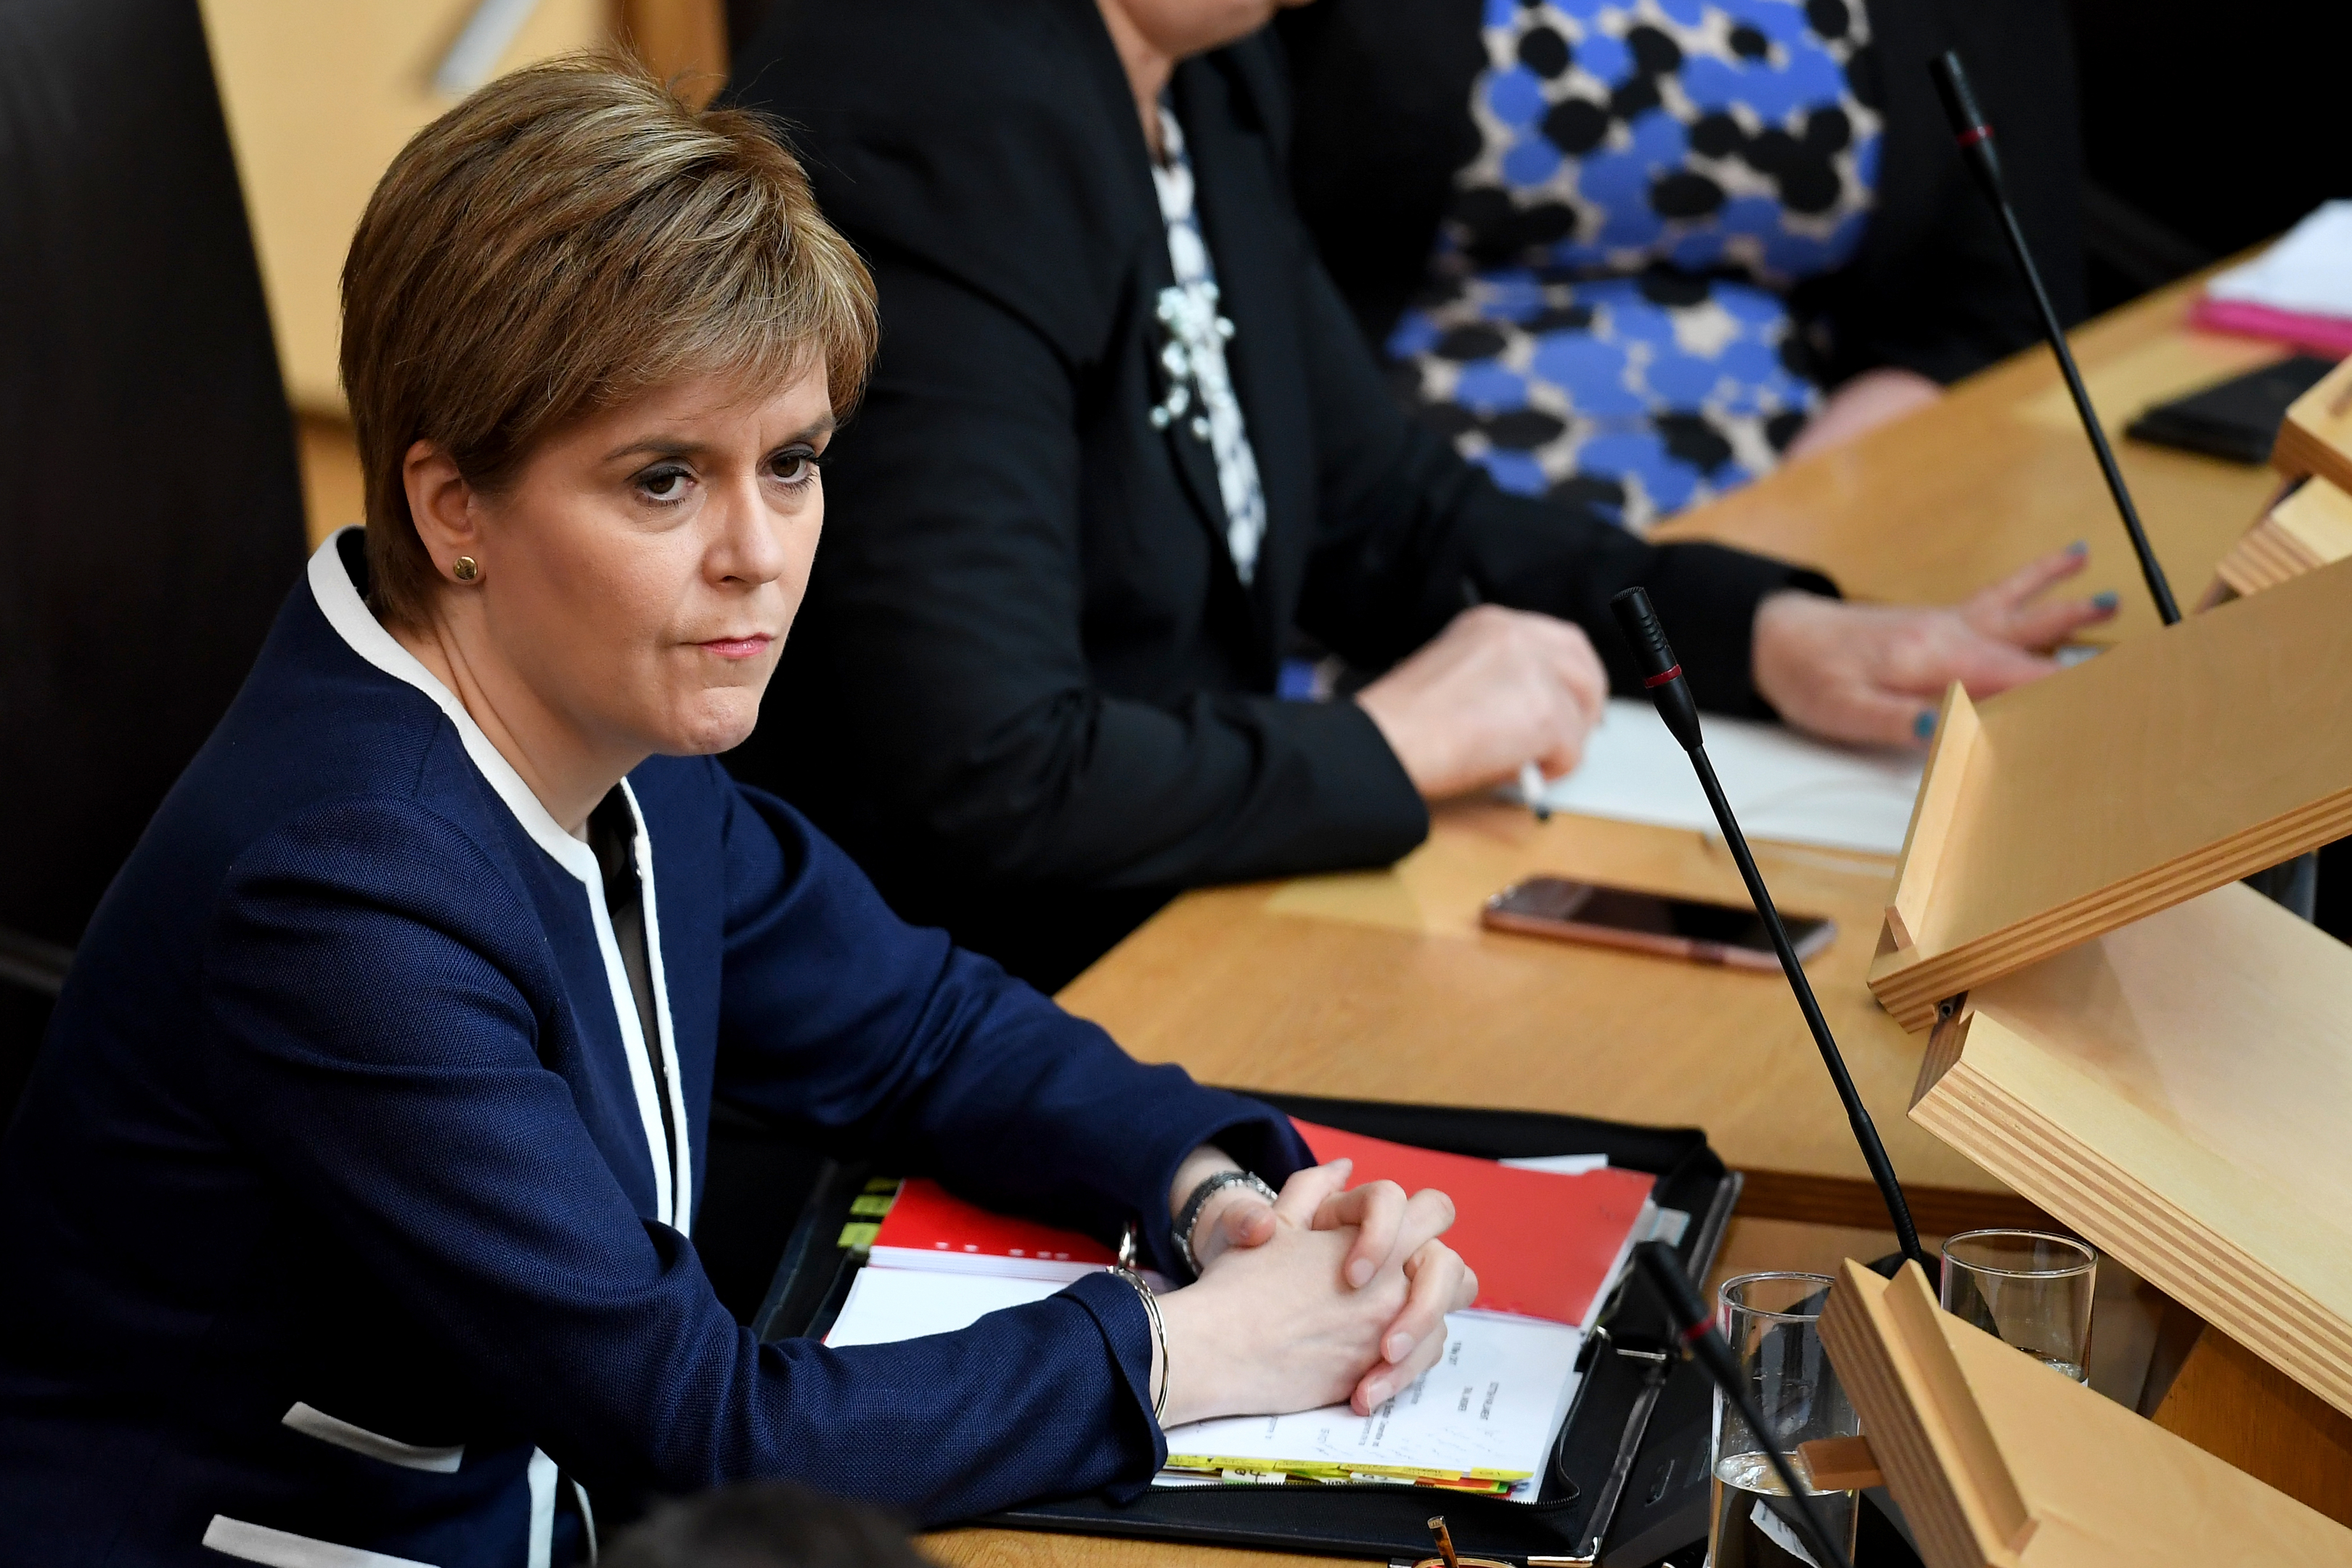 Scotland's First Minister Nicola Sturgeon attends First Minister's Questions at the Scottish Parliament (Jeff J Mitchell/Getty Images)